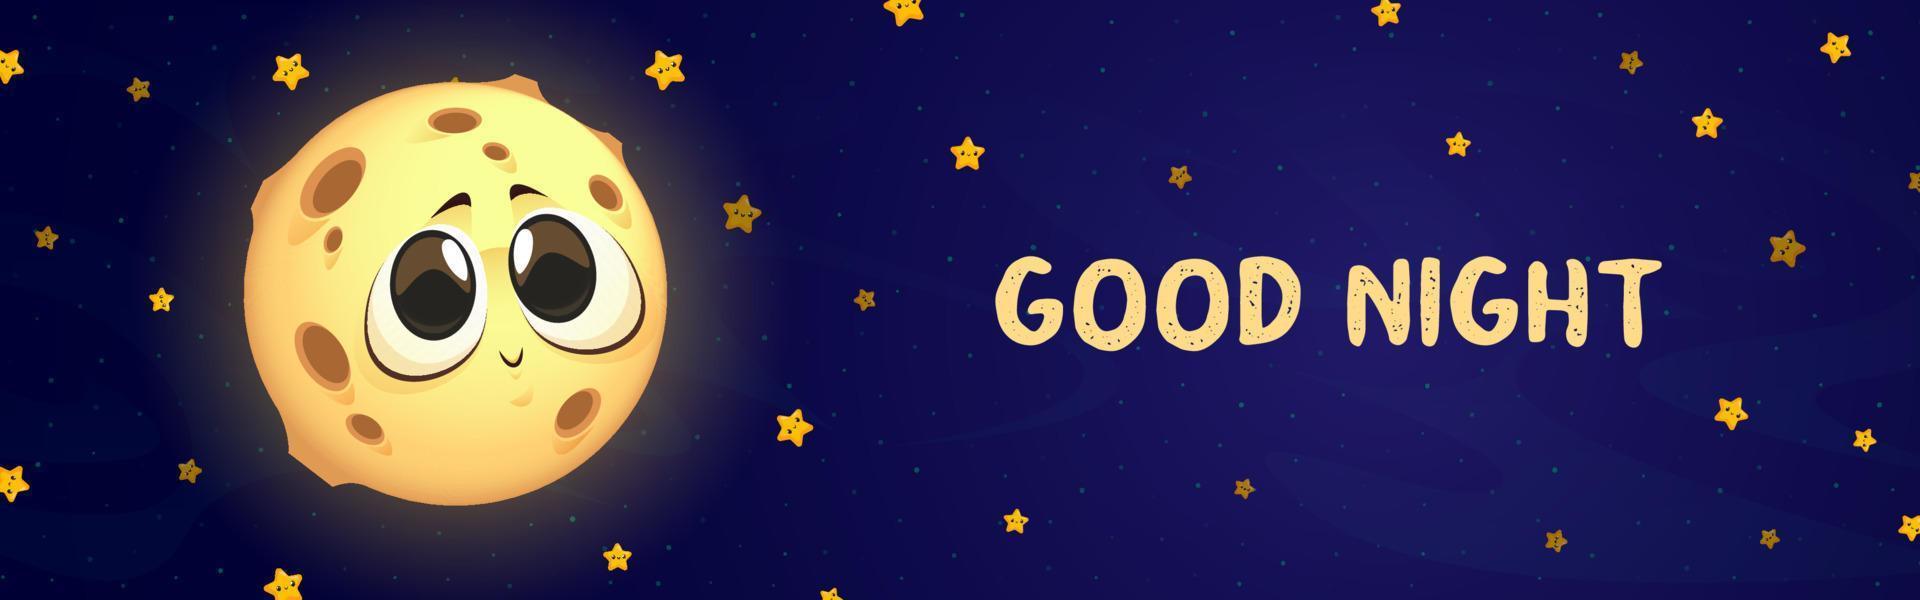 Good night cartoon banner with cute moon and stars vector